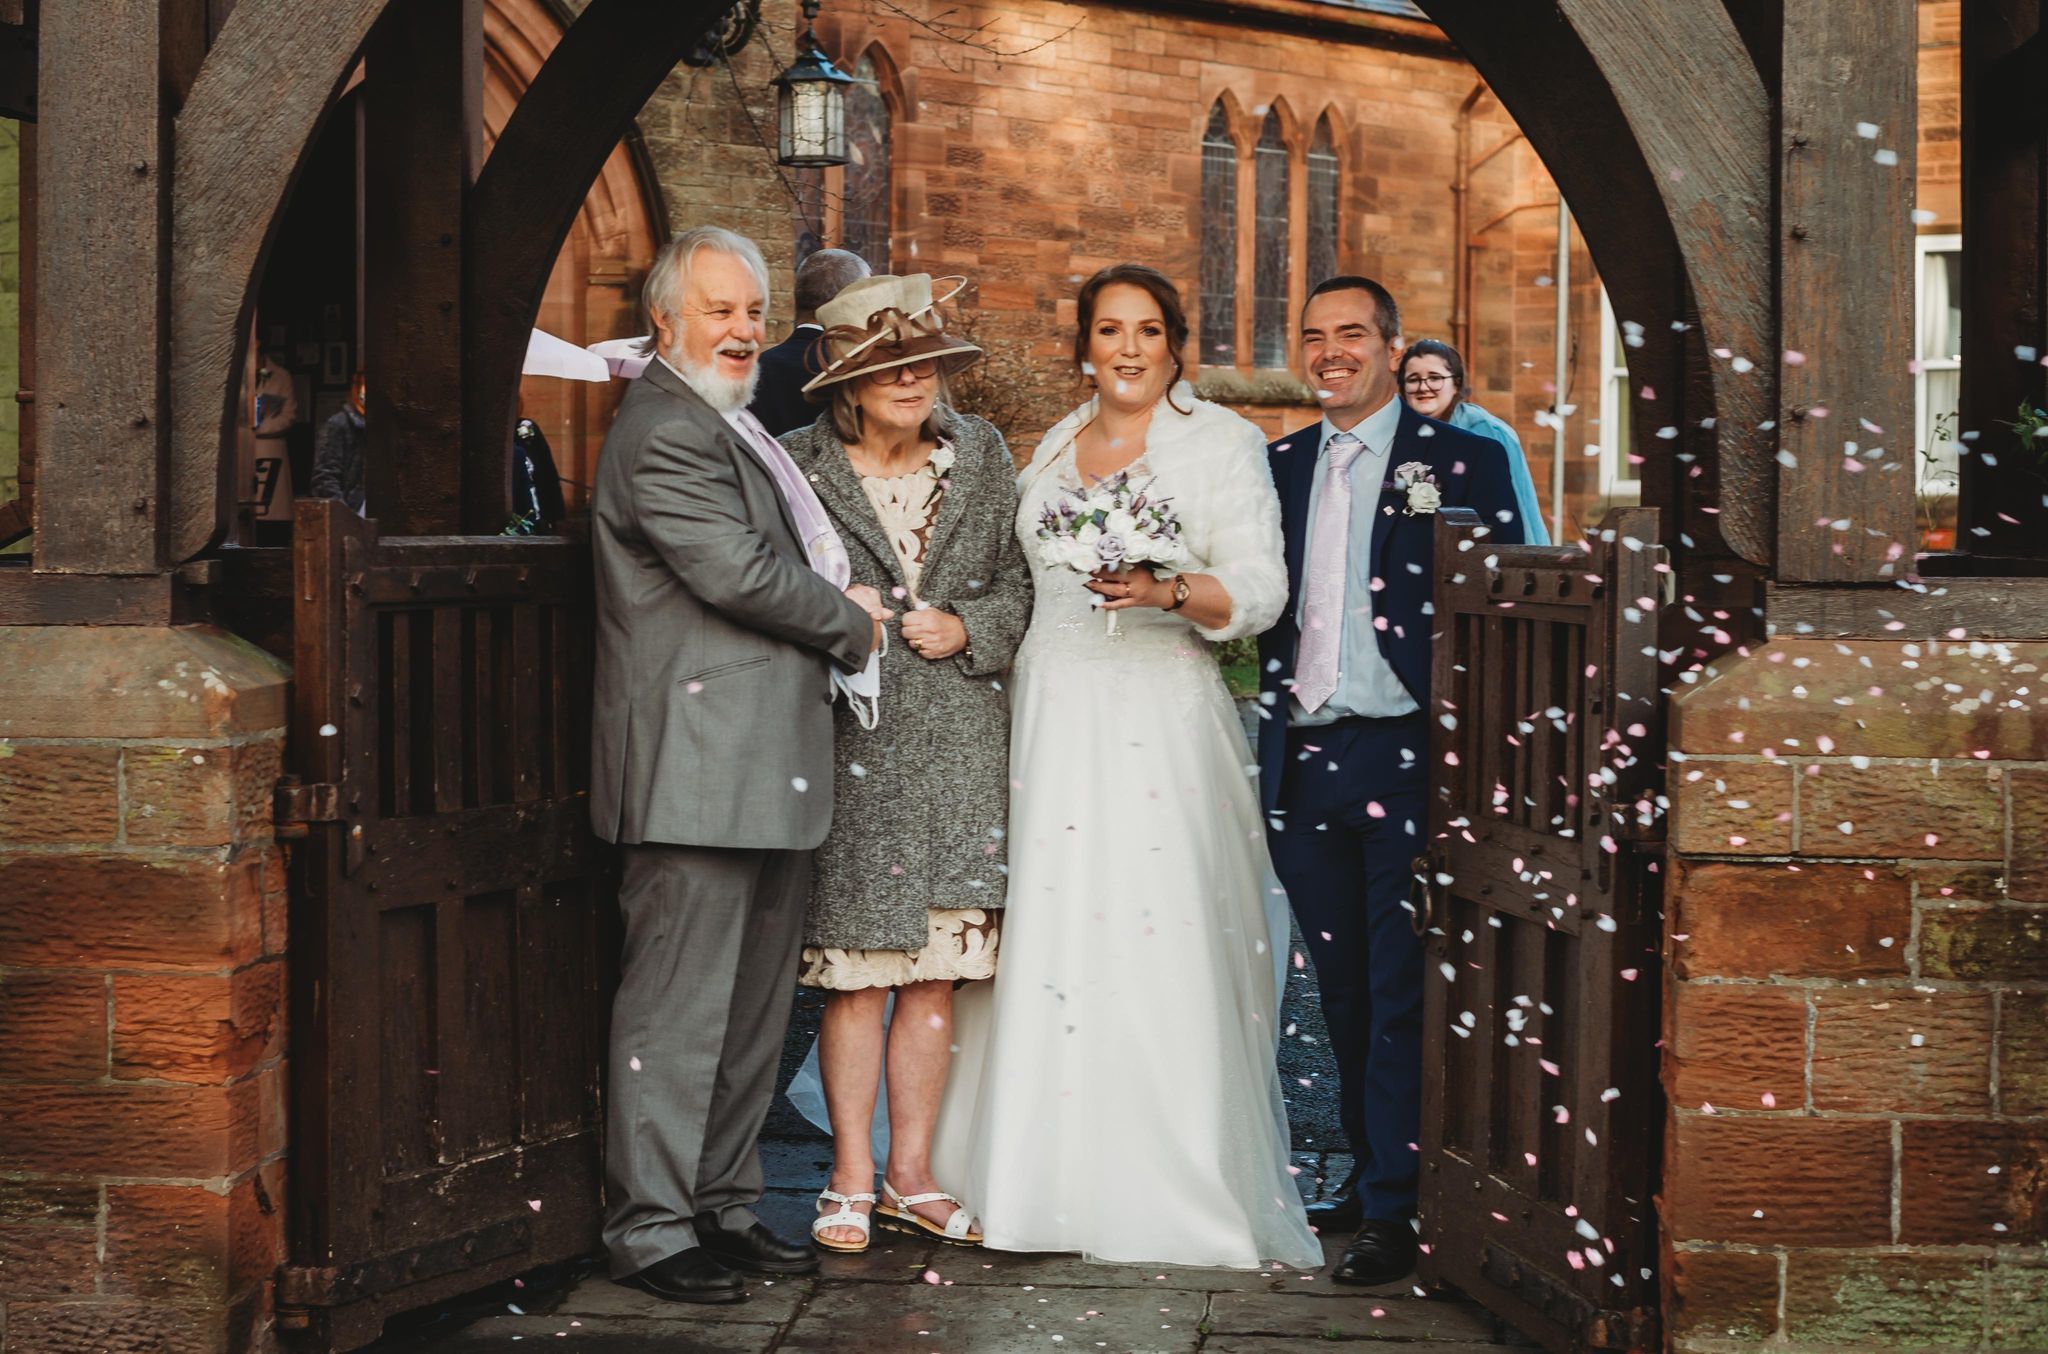 FAMILY: The couple was joined by 15 guests for their big day. Kolette Cartmel Photography